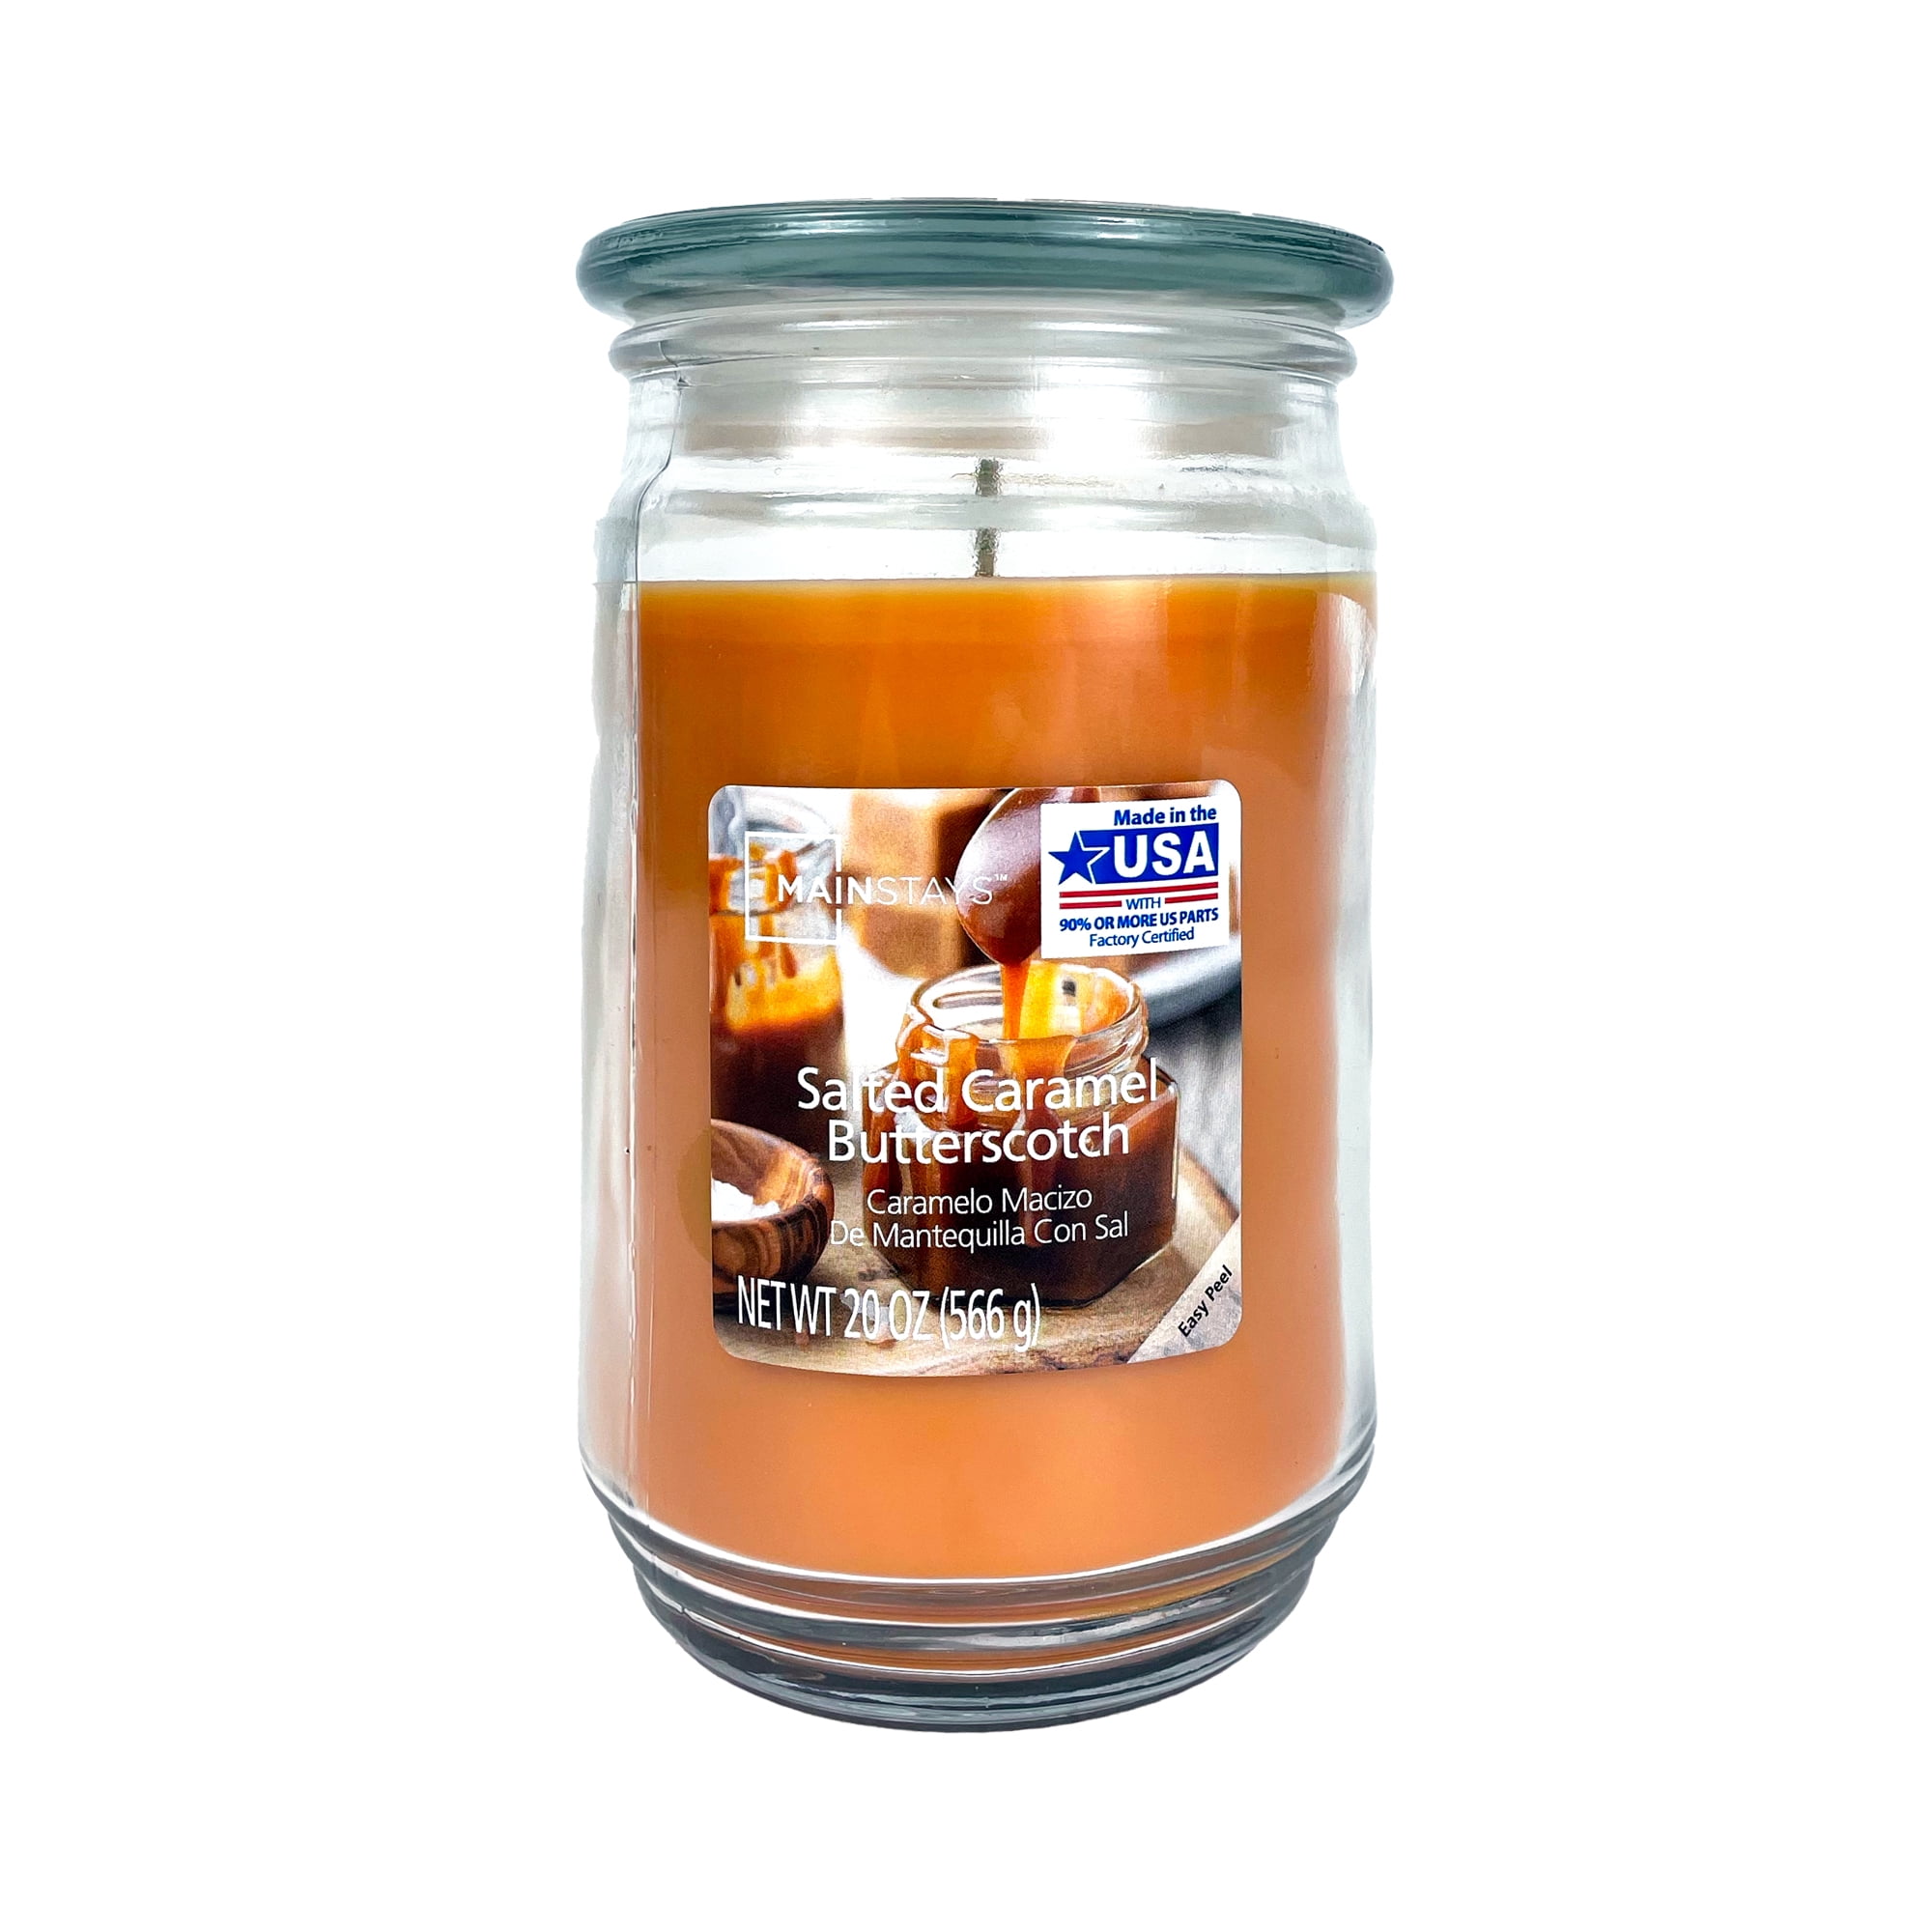 70hr PECAN CHEESECAKE BRULEE Bakery Caramel Vanilla Strong Scented SPIRAL CANDLE 